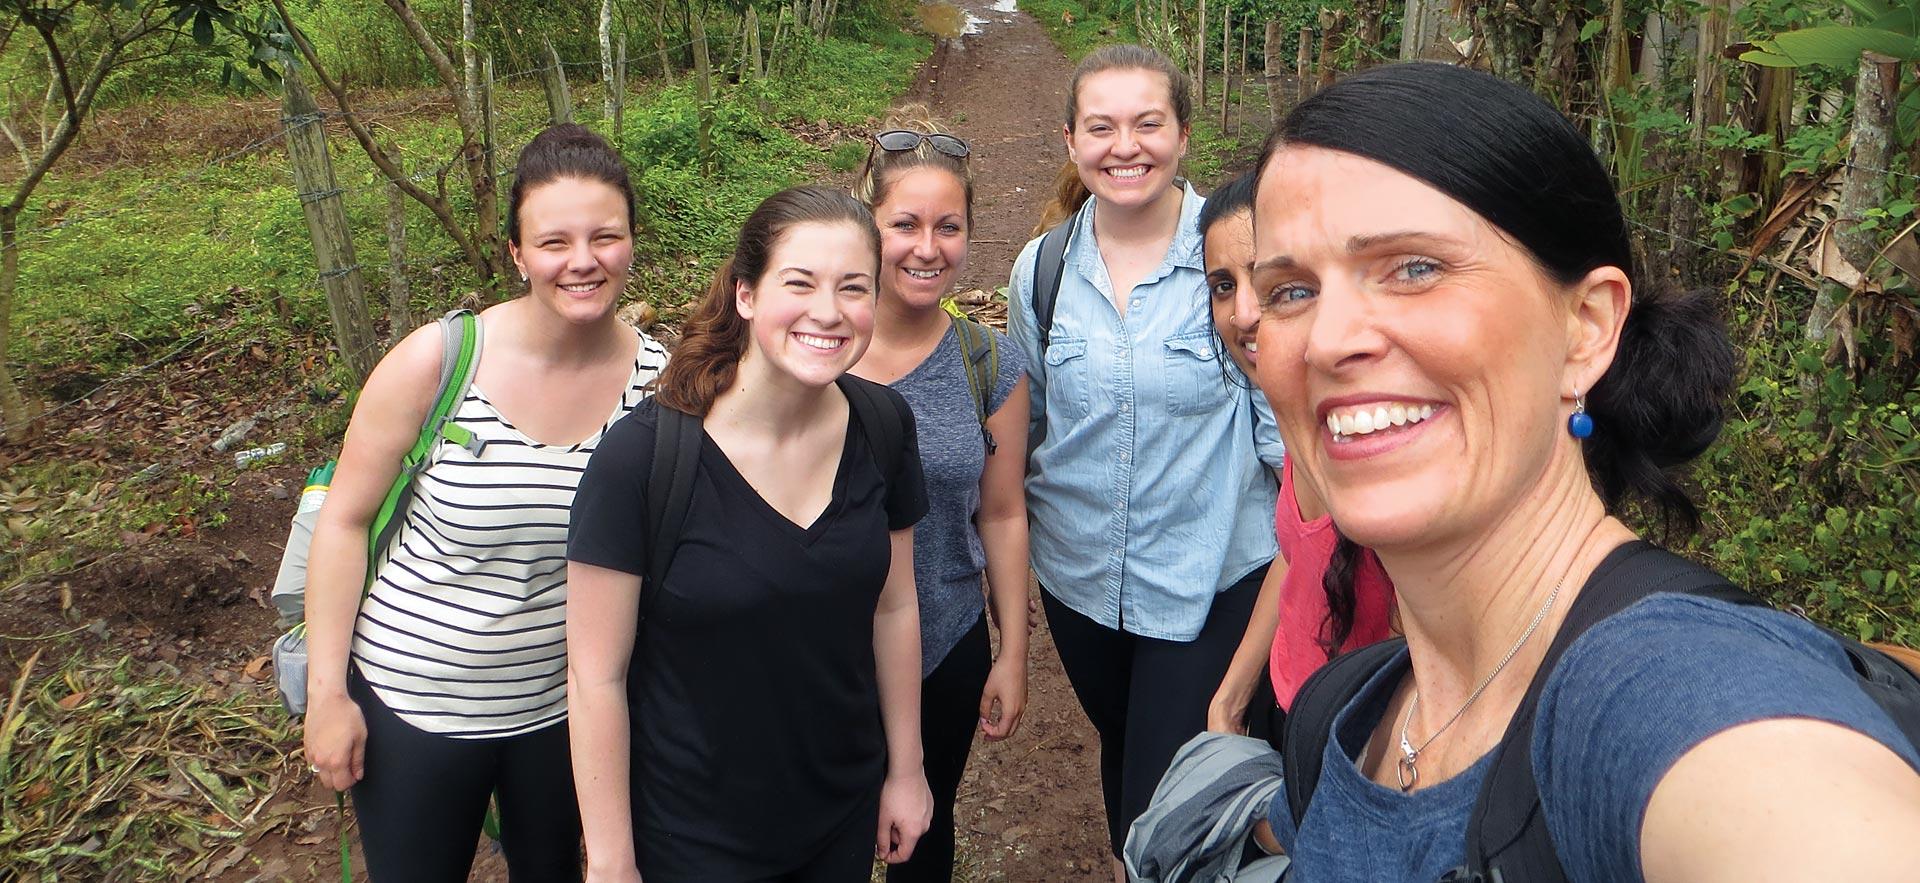 Nursing students and instructor smile for a photo while volunteering in Nicaragua.